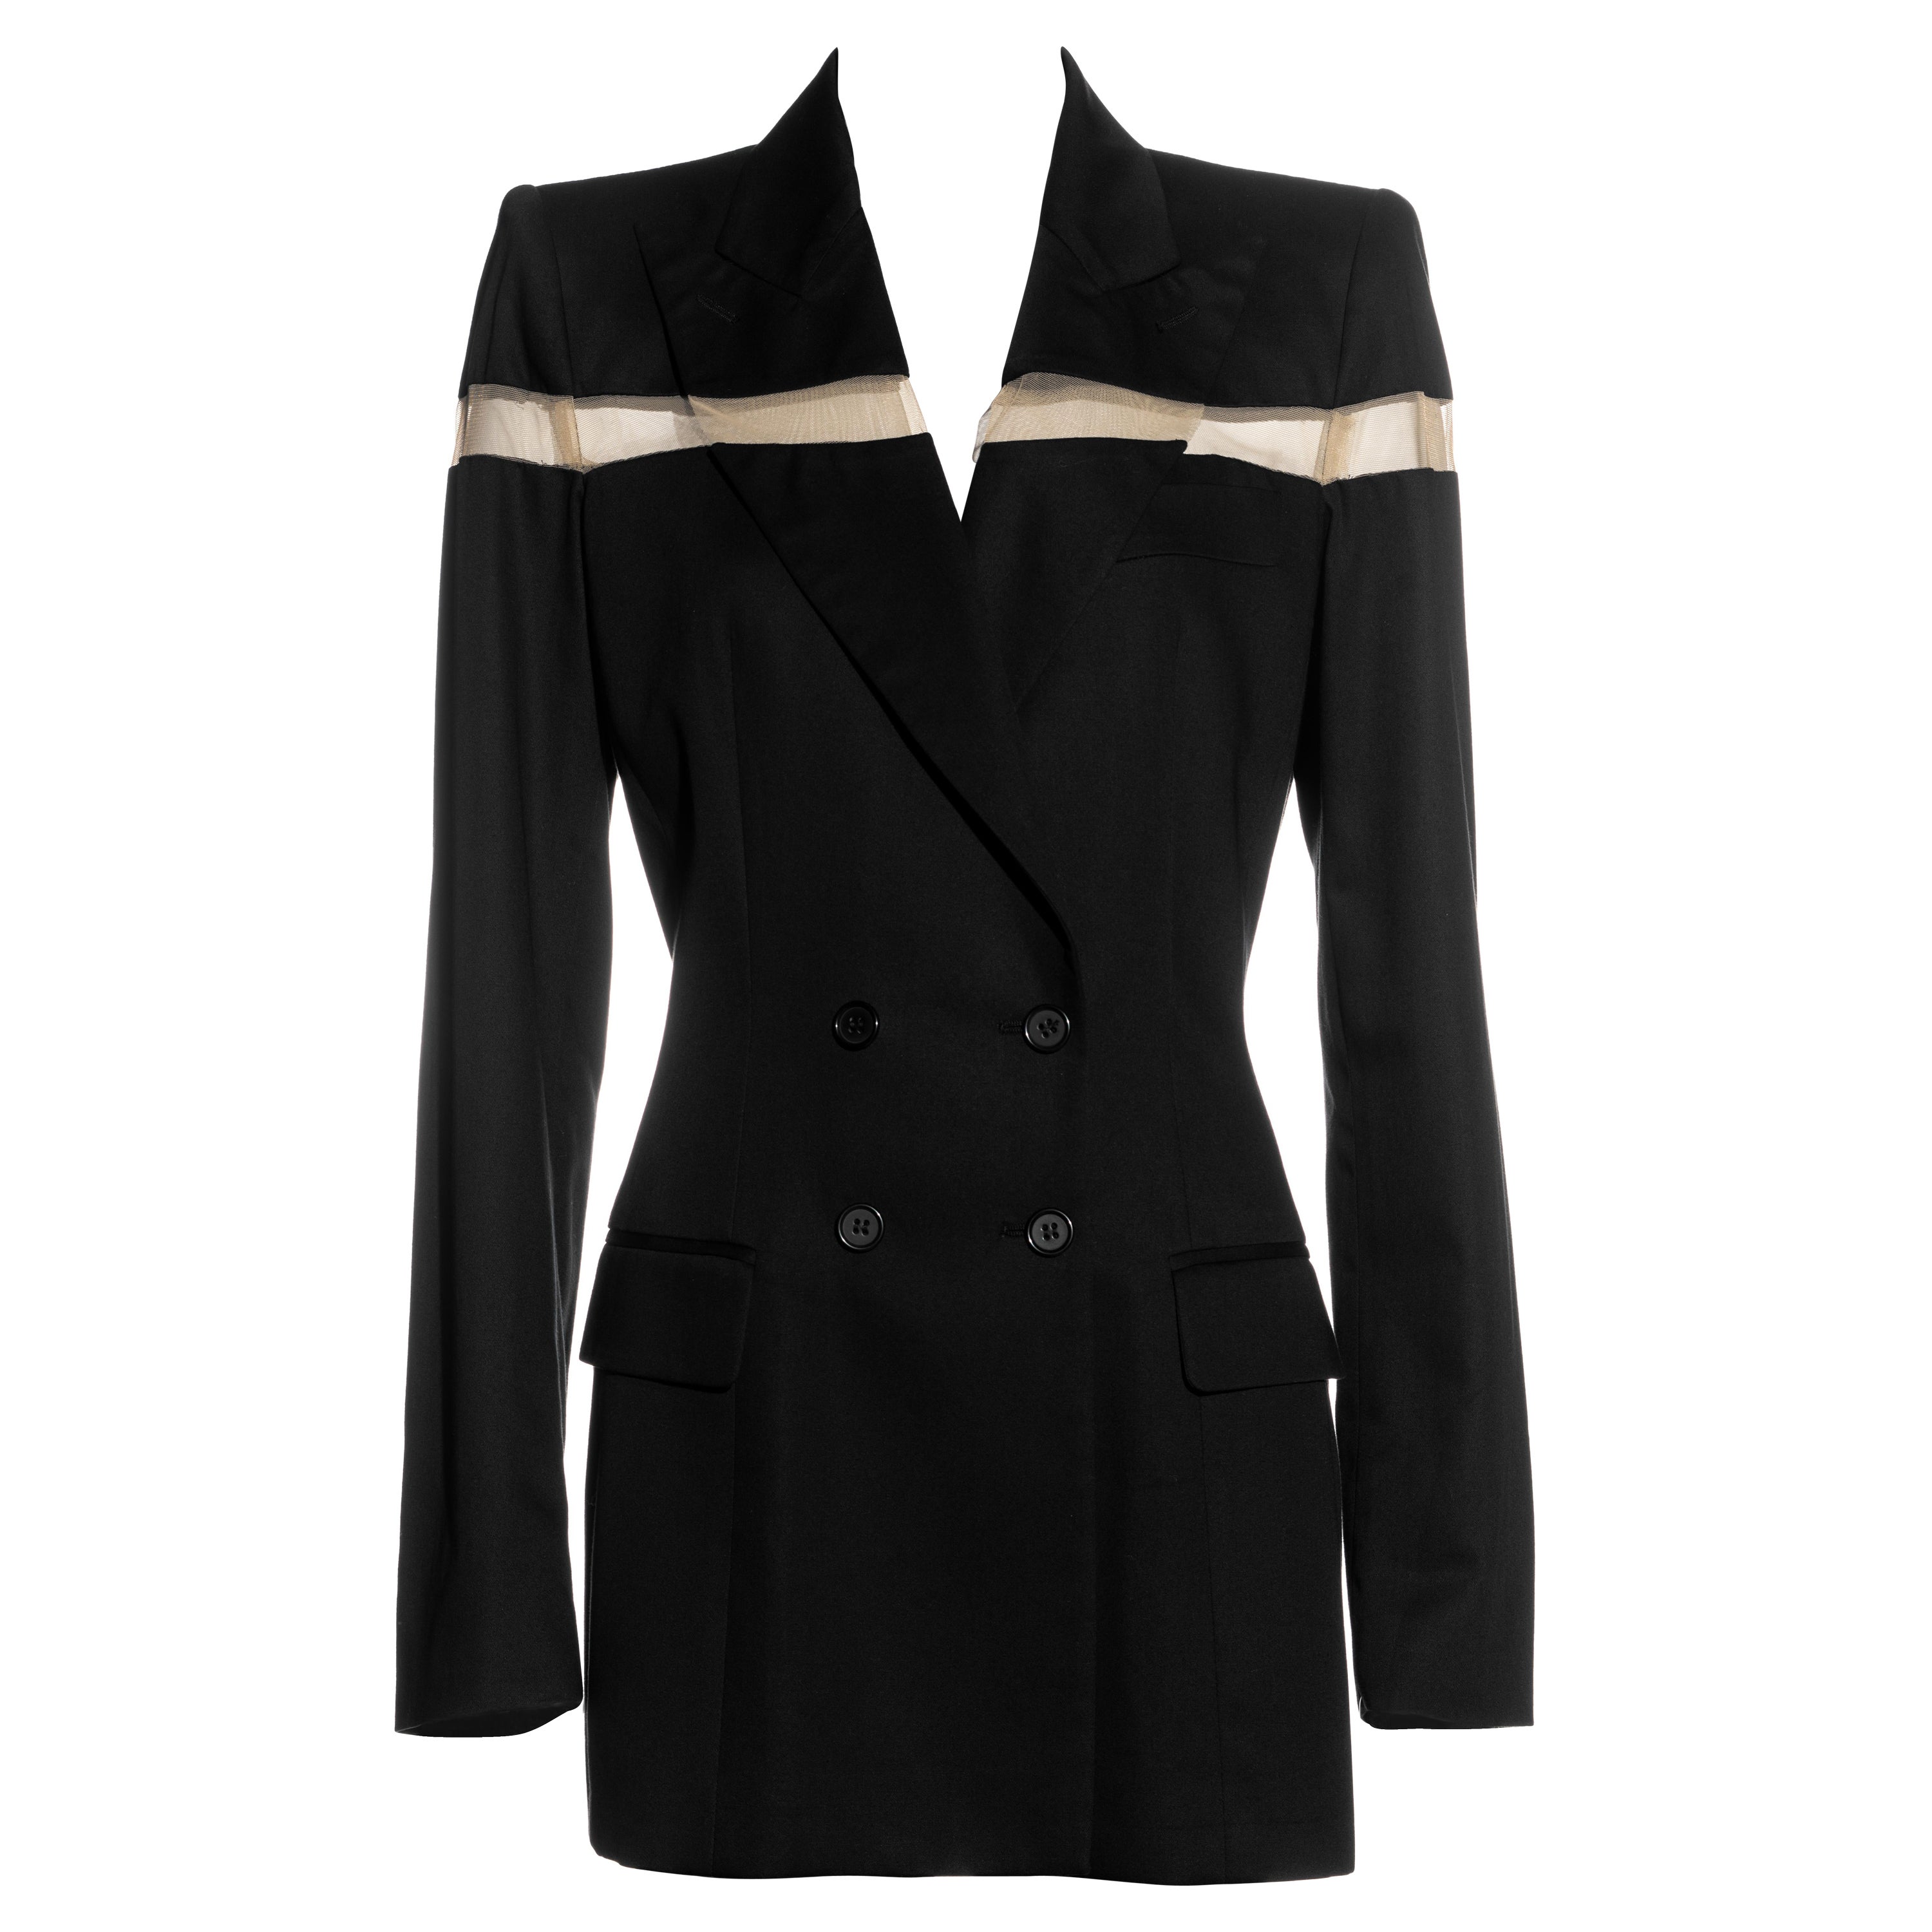 Alexander McQueen black double-breasted blazer mini dress with cut-out, ss 1998